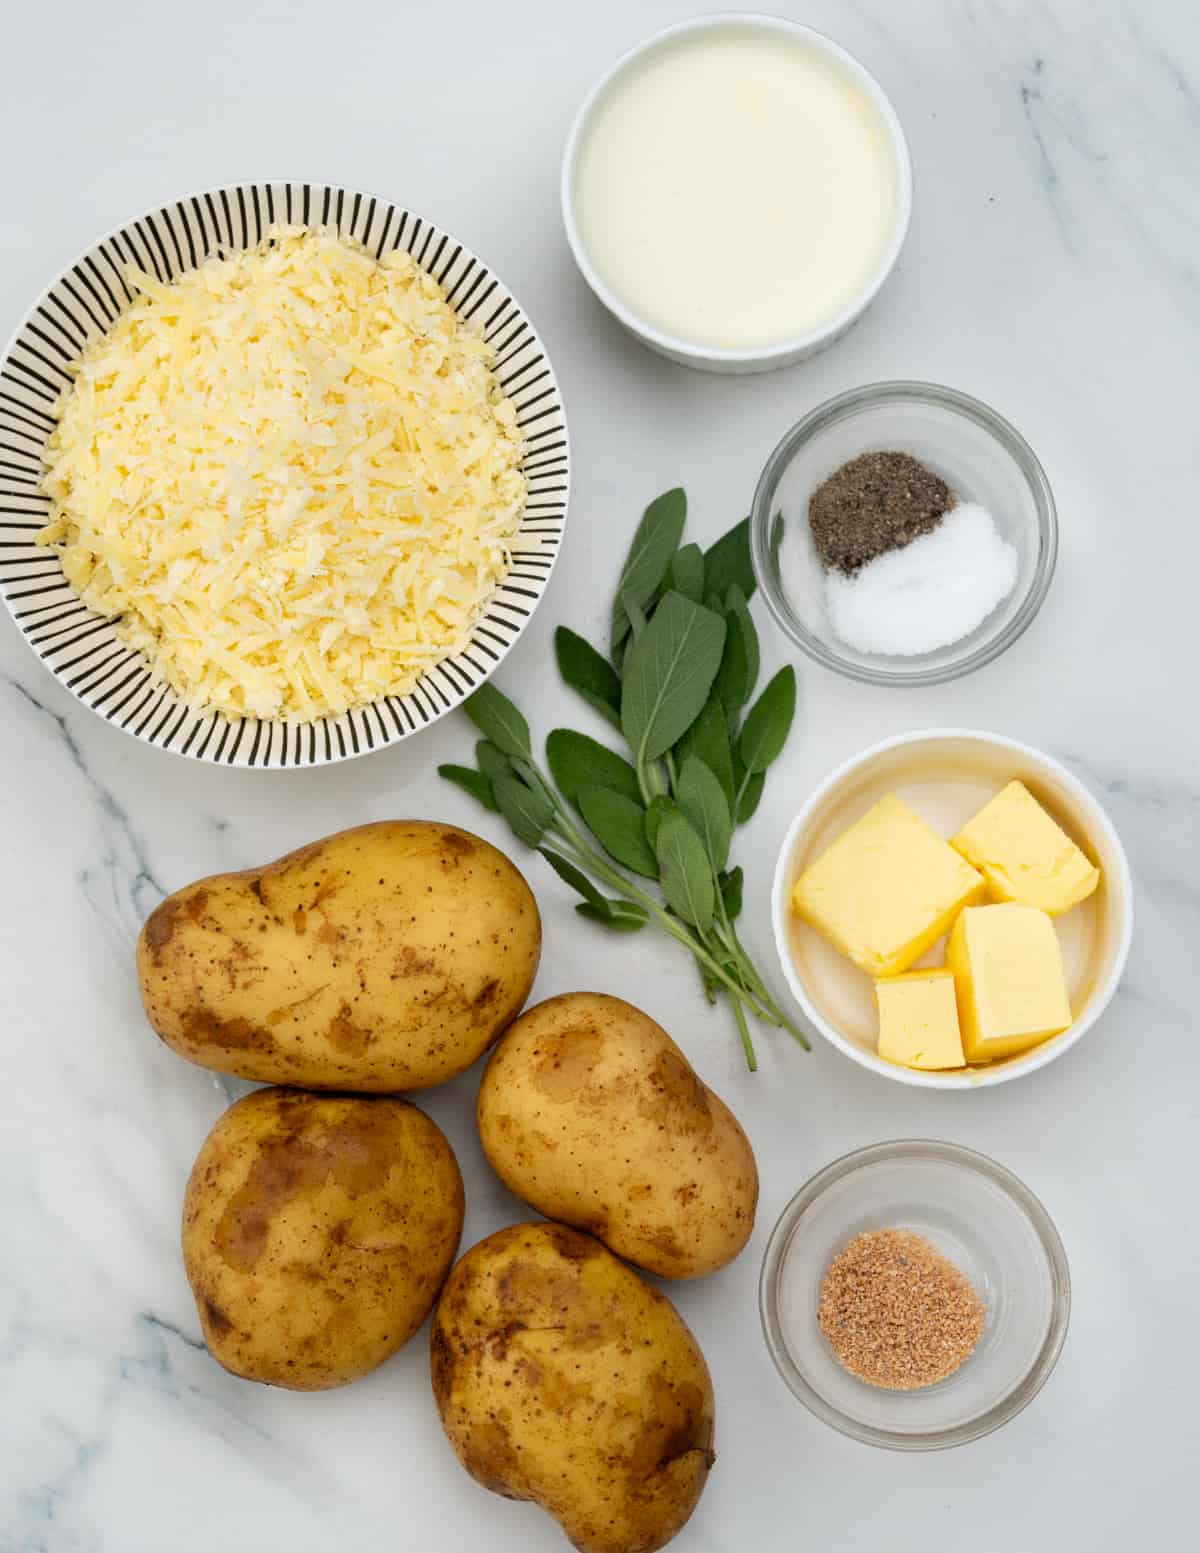 Ingredients for baked mashed potatoes. 